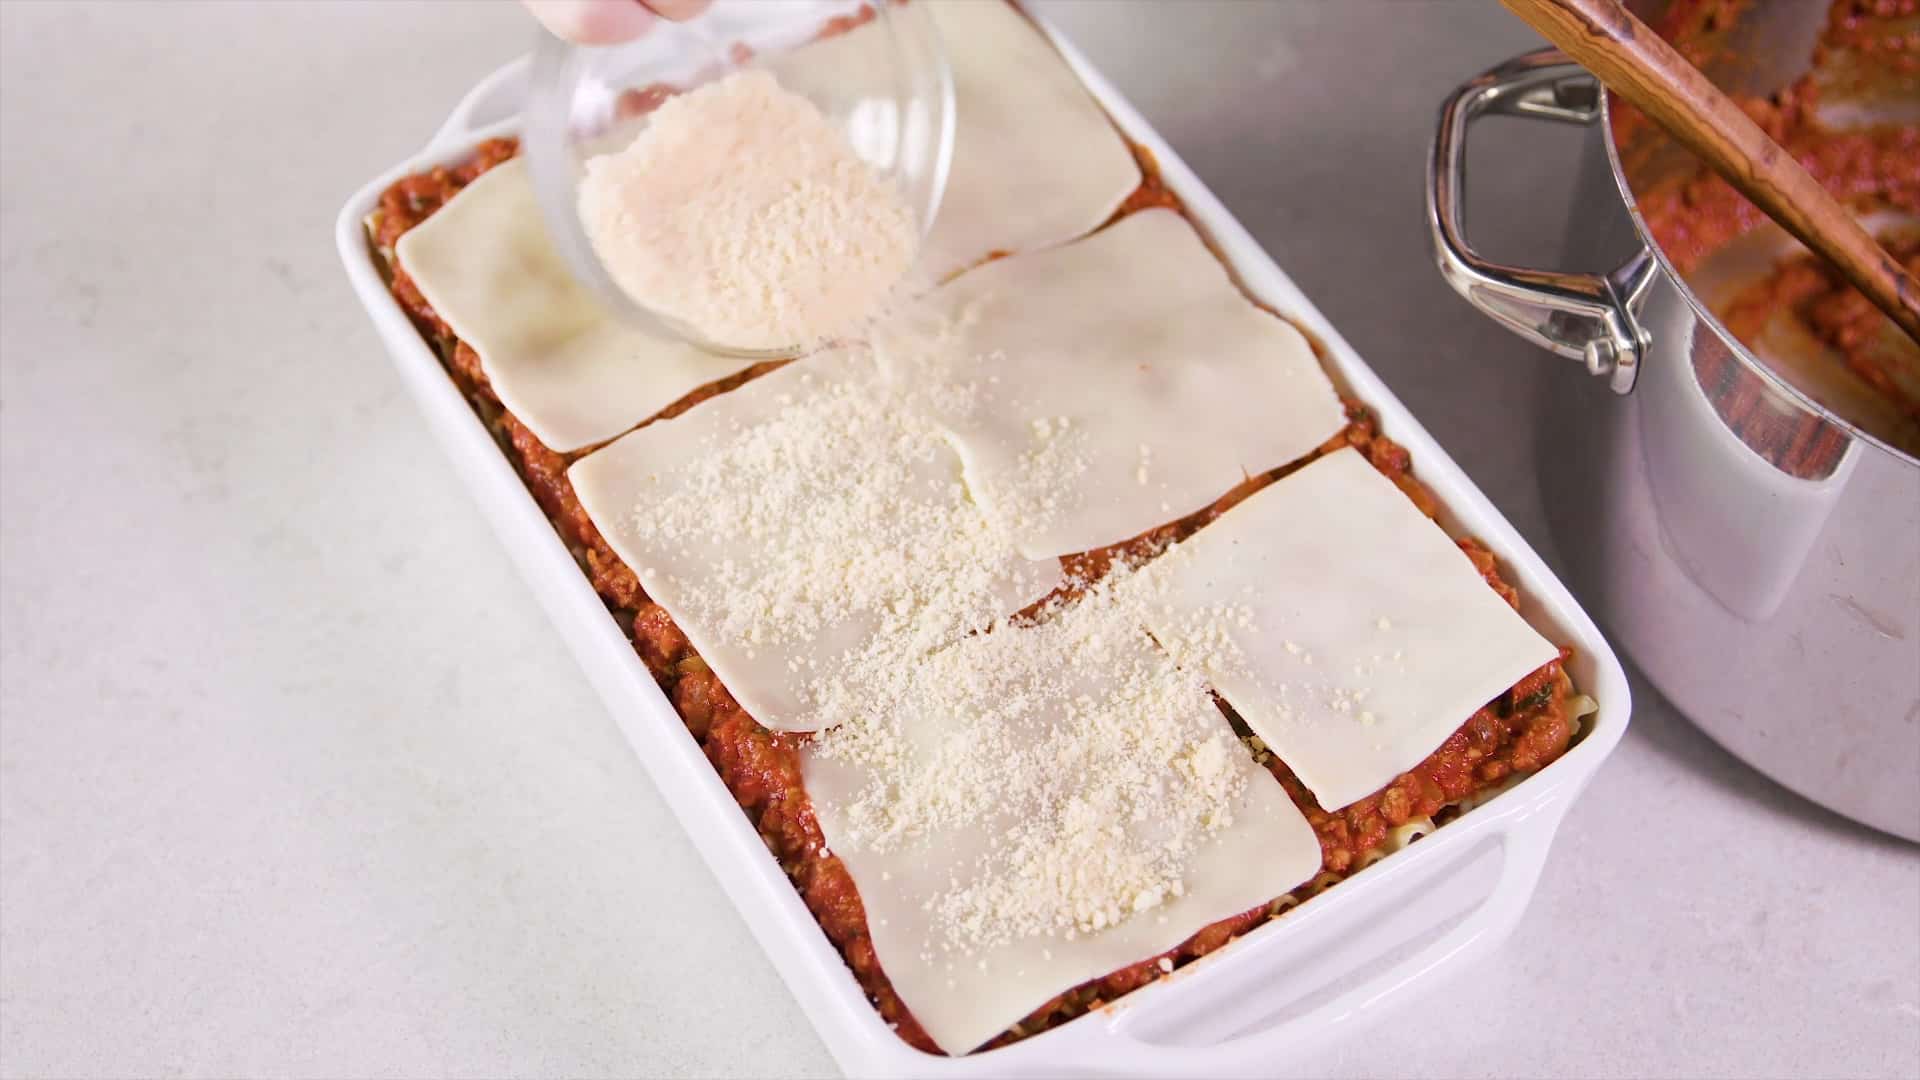 Overhead view of a high sided white glass casserole dish filled with multiple layers of lasagna and the newest layer being added to the top layer of mozzarella cheese slices with grated parmesan cheese sprinkled from a clear glass mixing bowl.